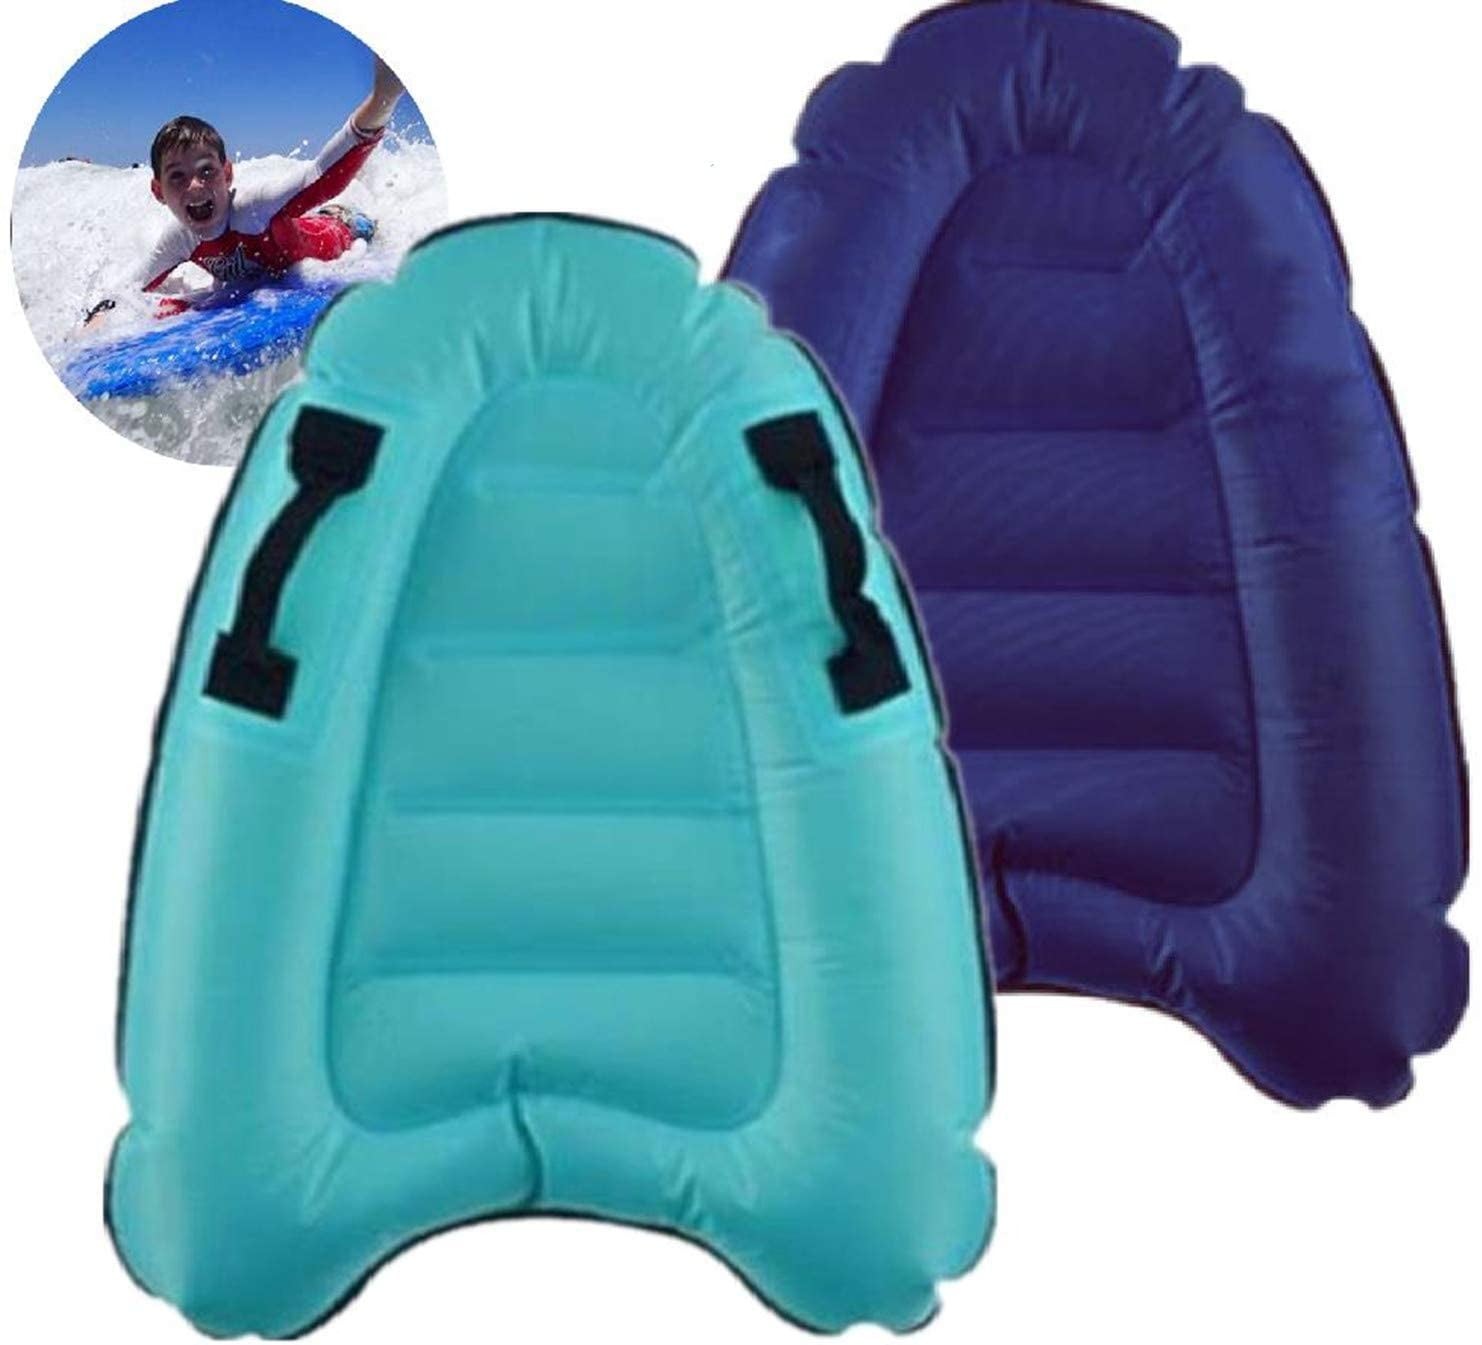 Inflatable Surfboard Mat Swimming Pool Float Beach Chair Float Lounger Raft 